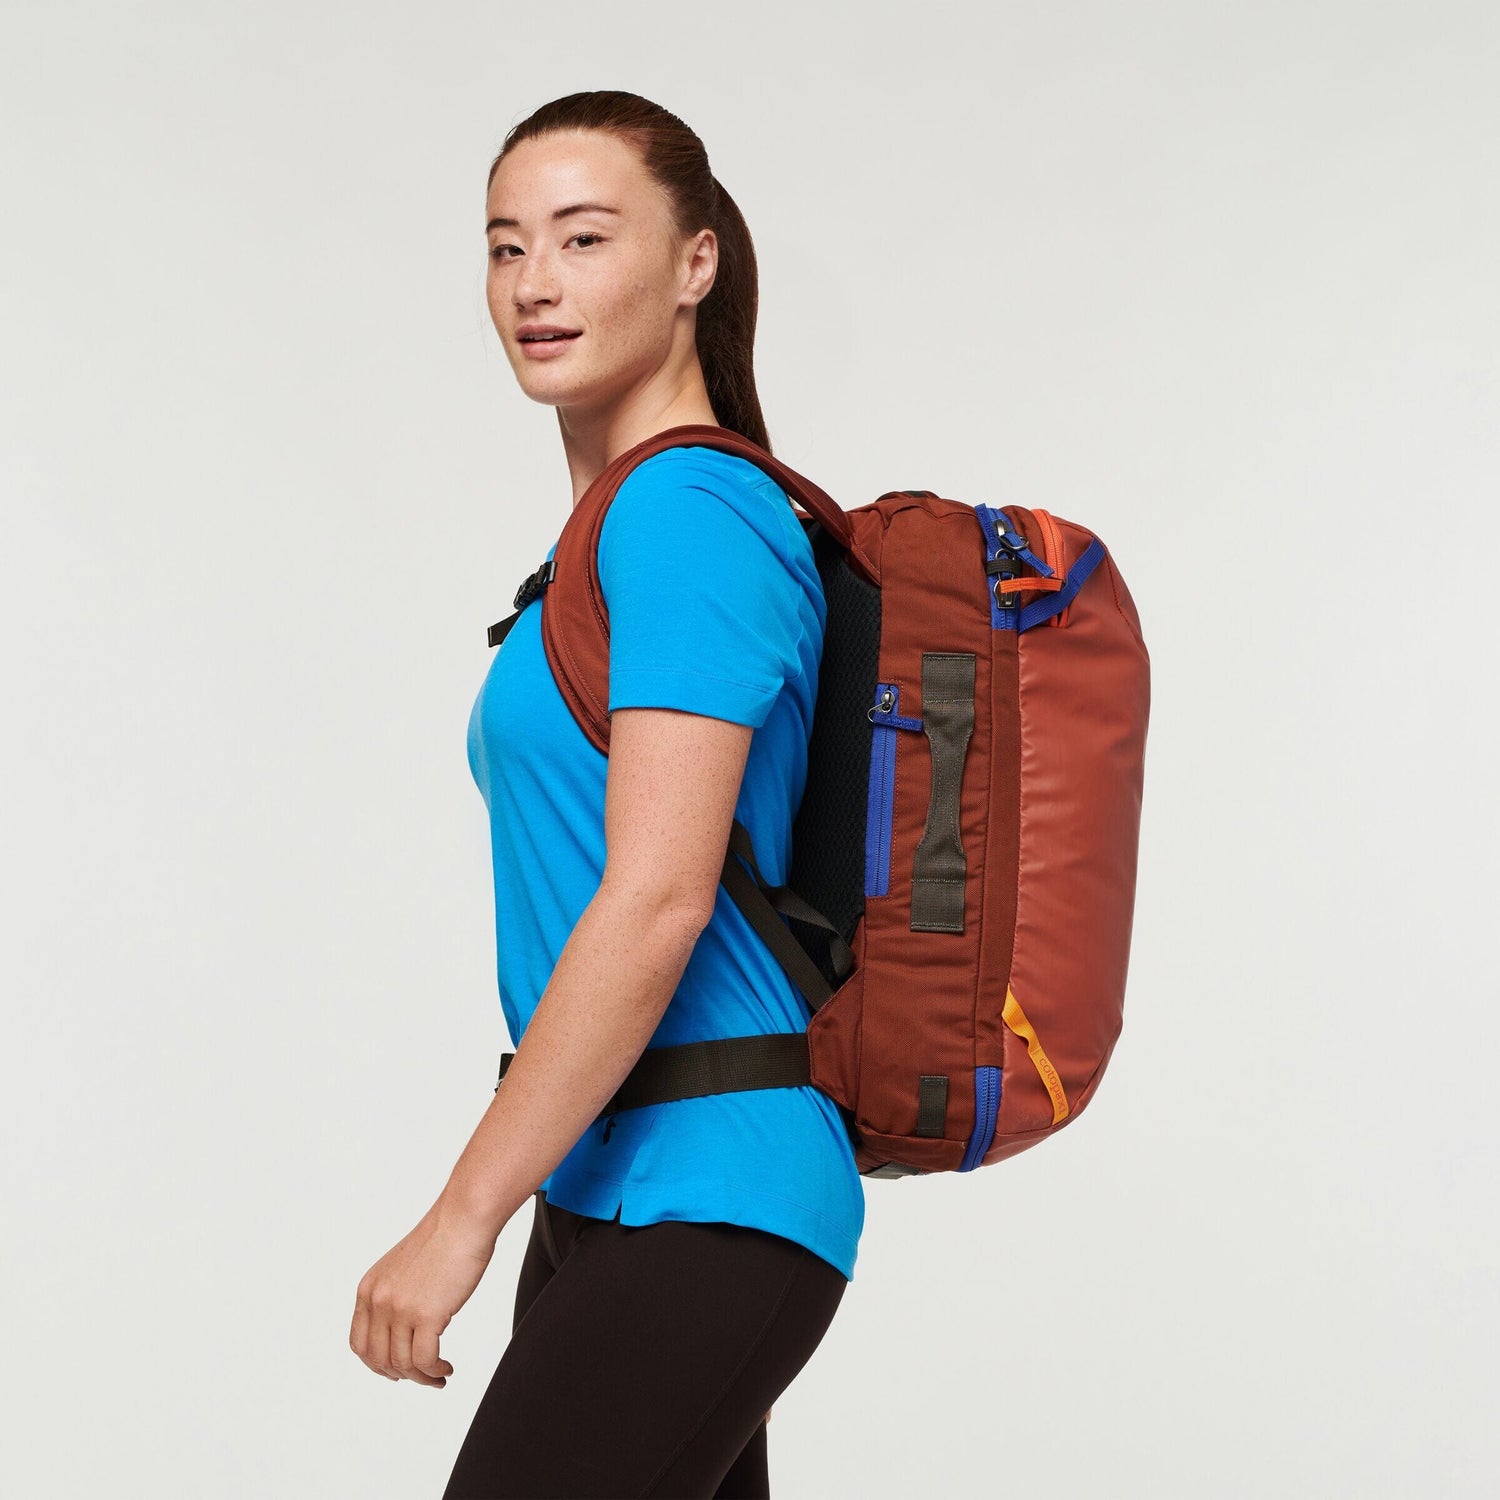 Cotopaxi Allpa 28L Travel Pack - TPU-coated 1000D polyester Rust Bags